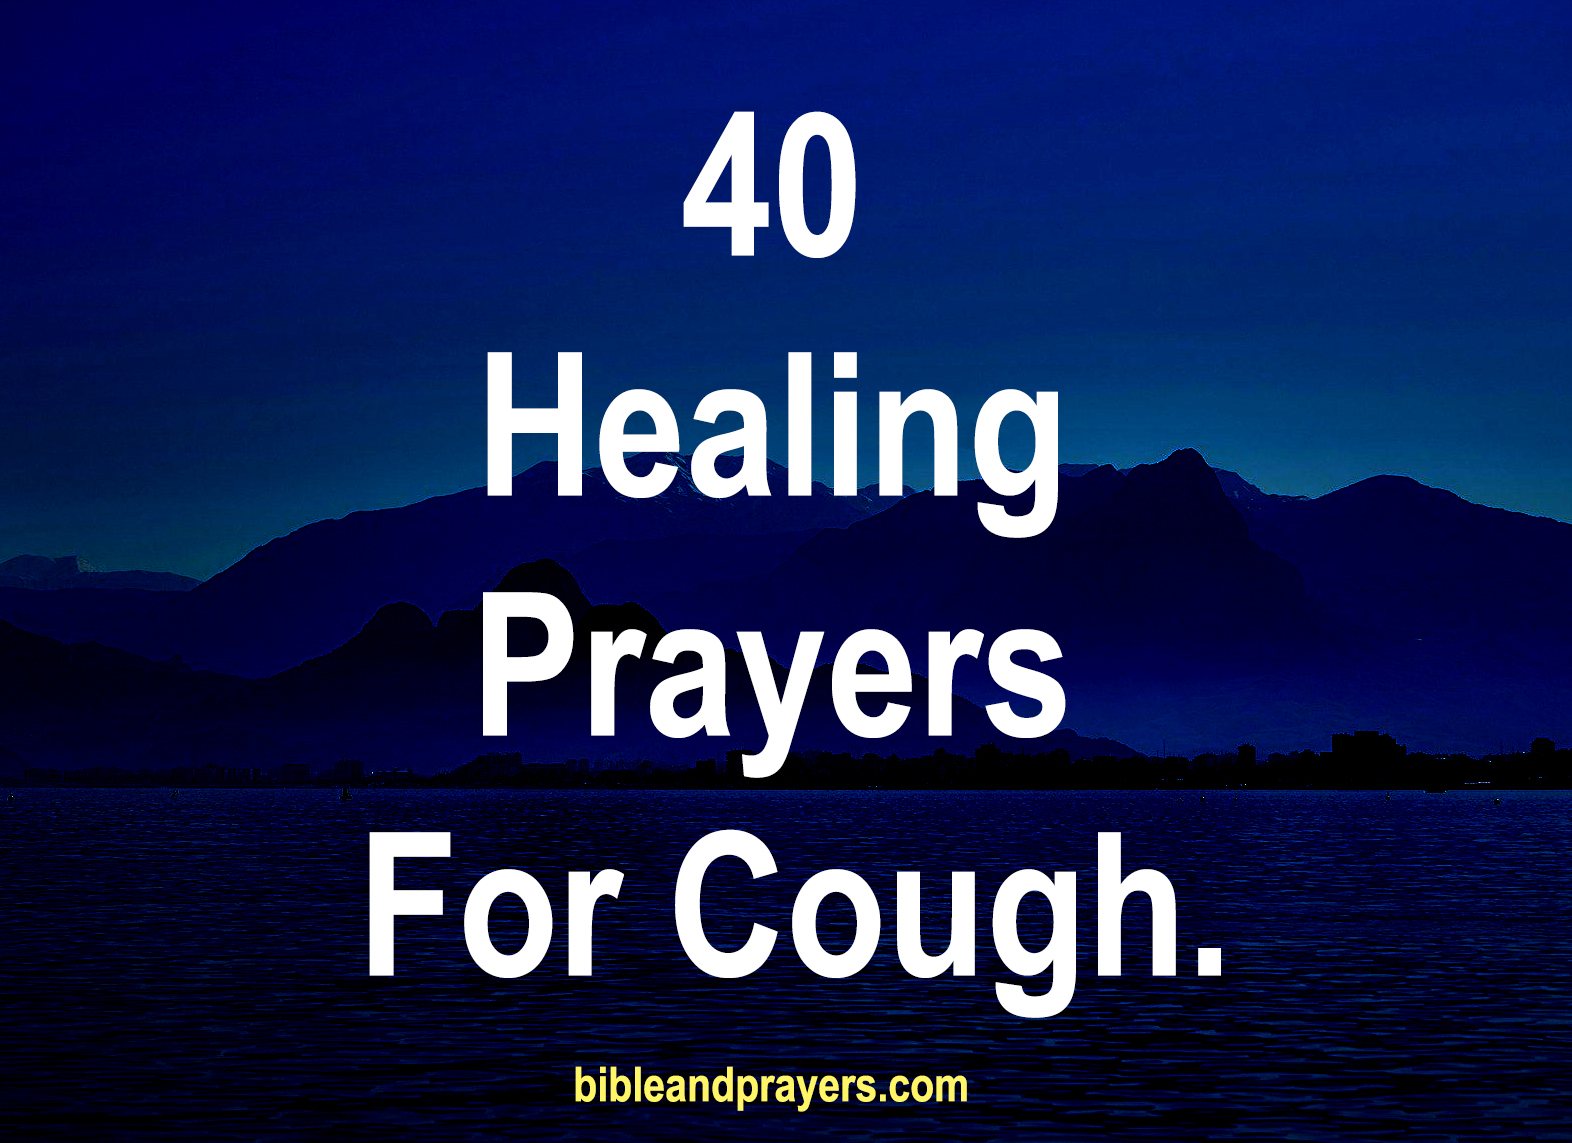 40 Healing Prayers For Cough.